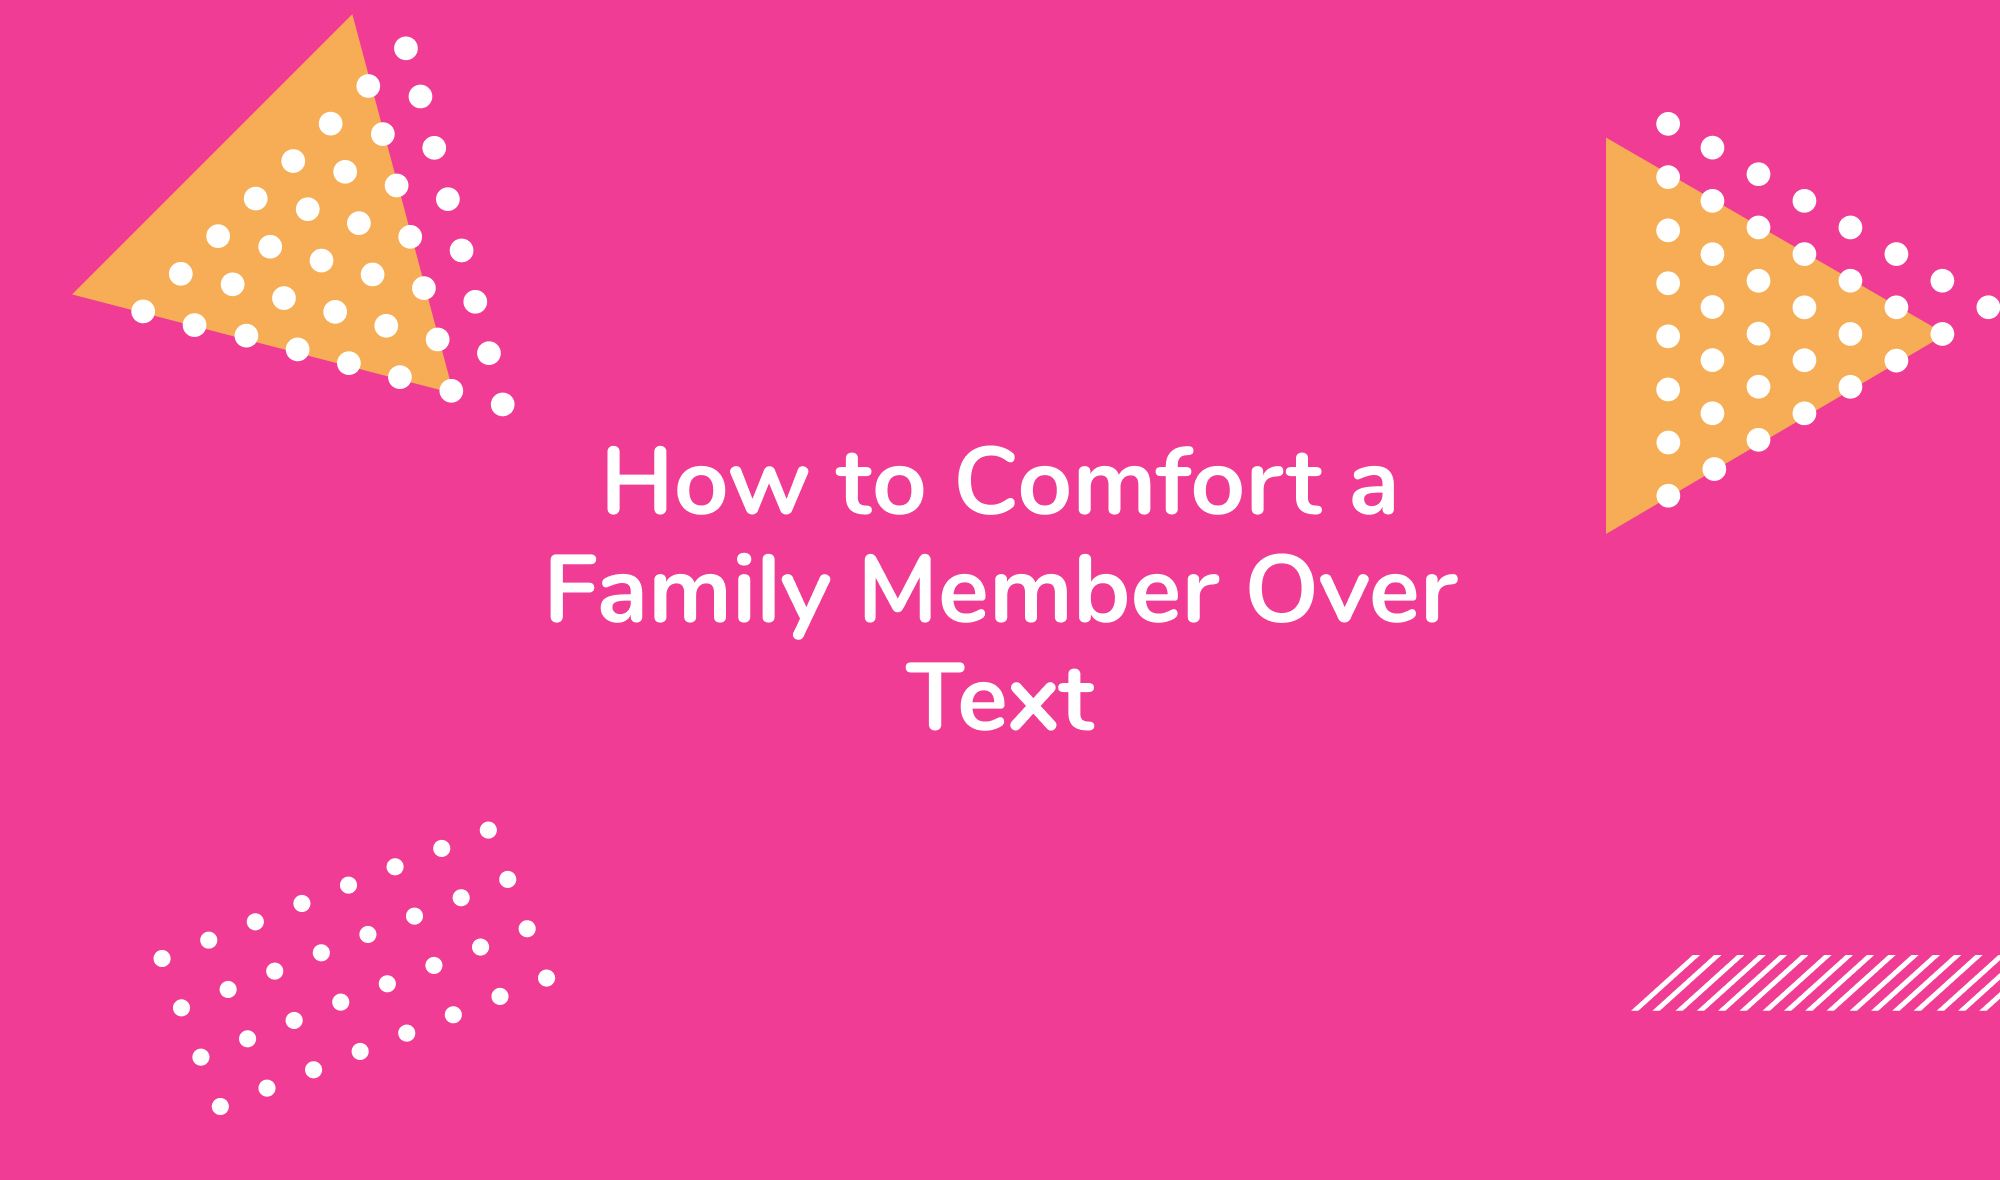 How to Comfort a Family Member Over Text